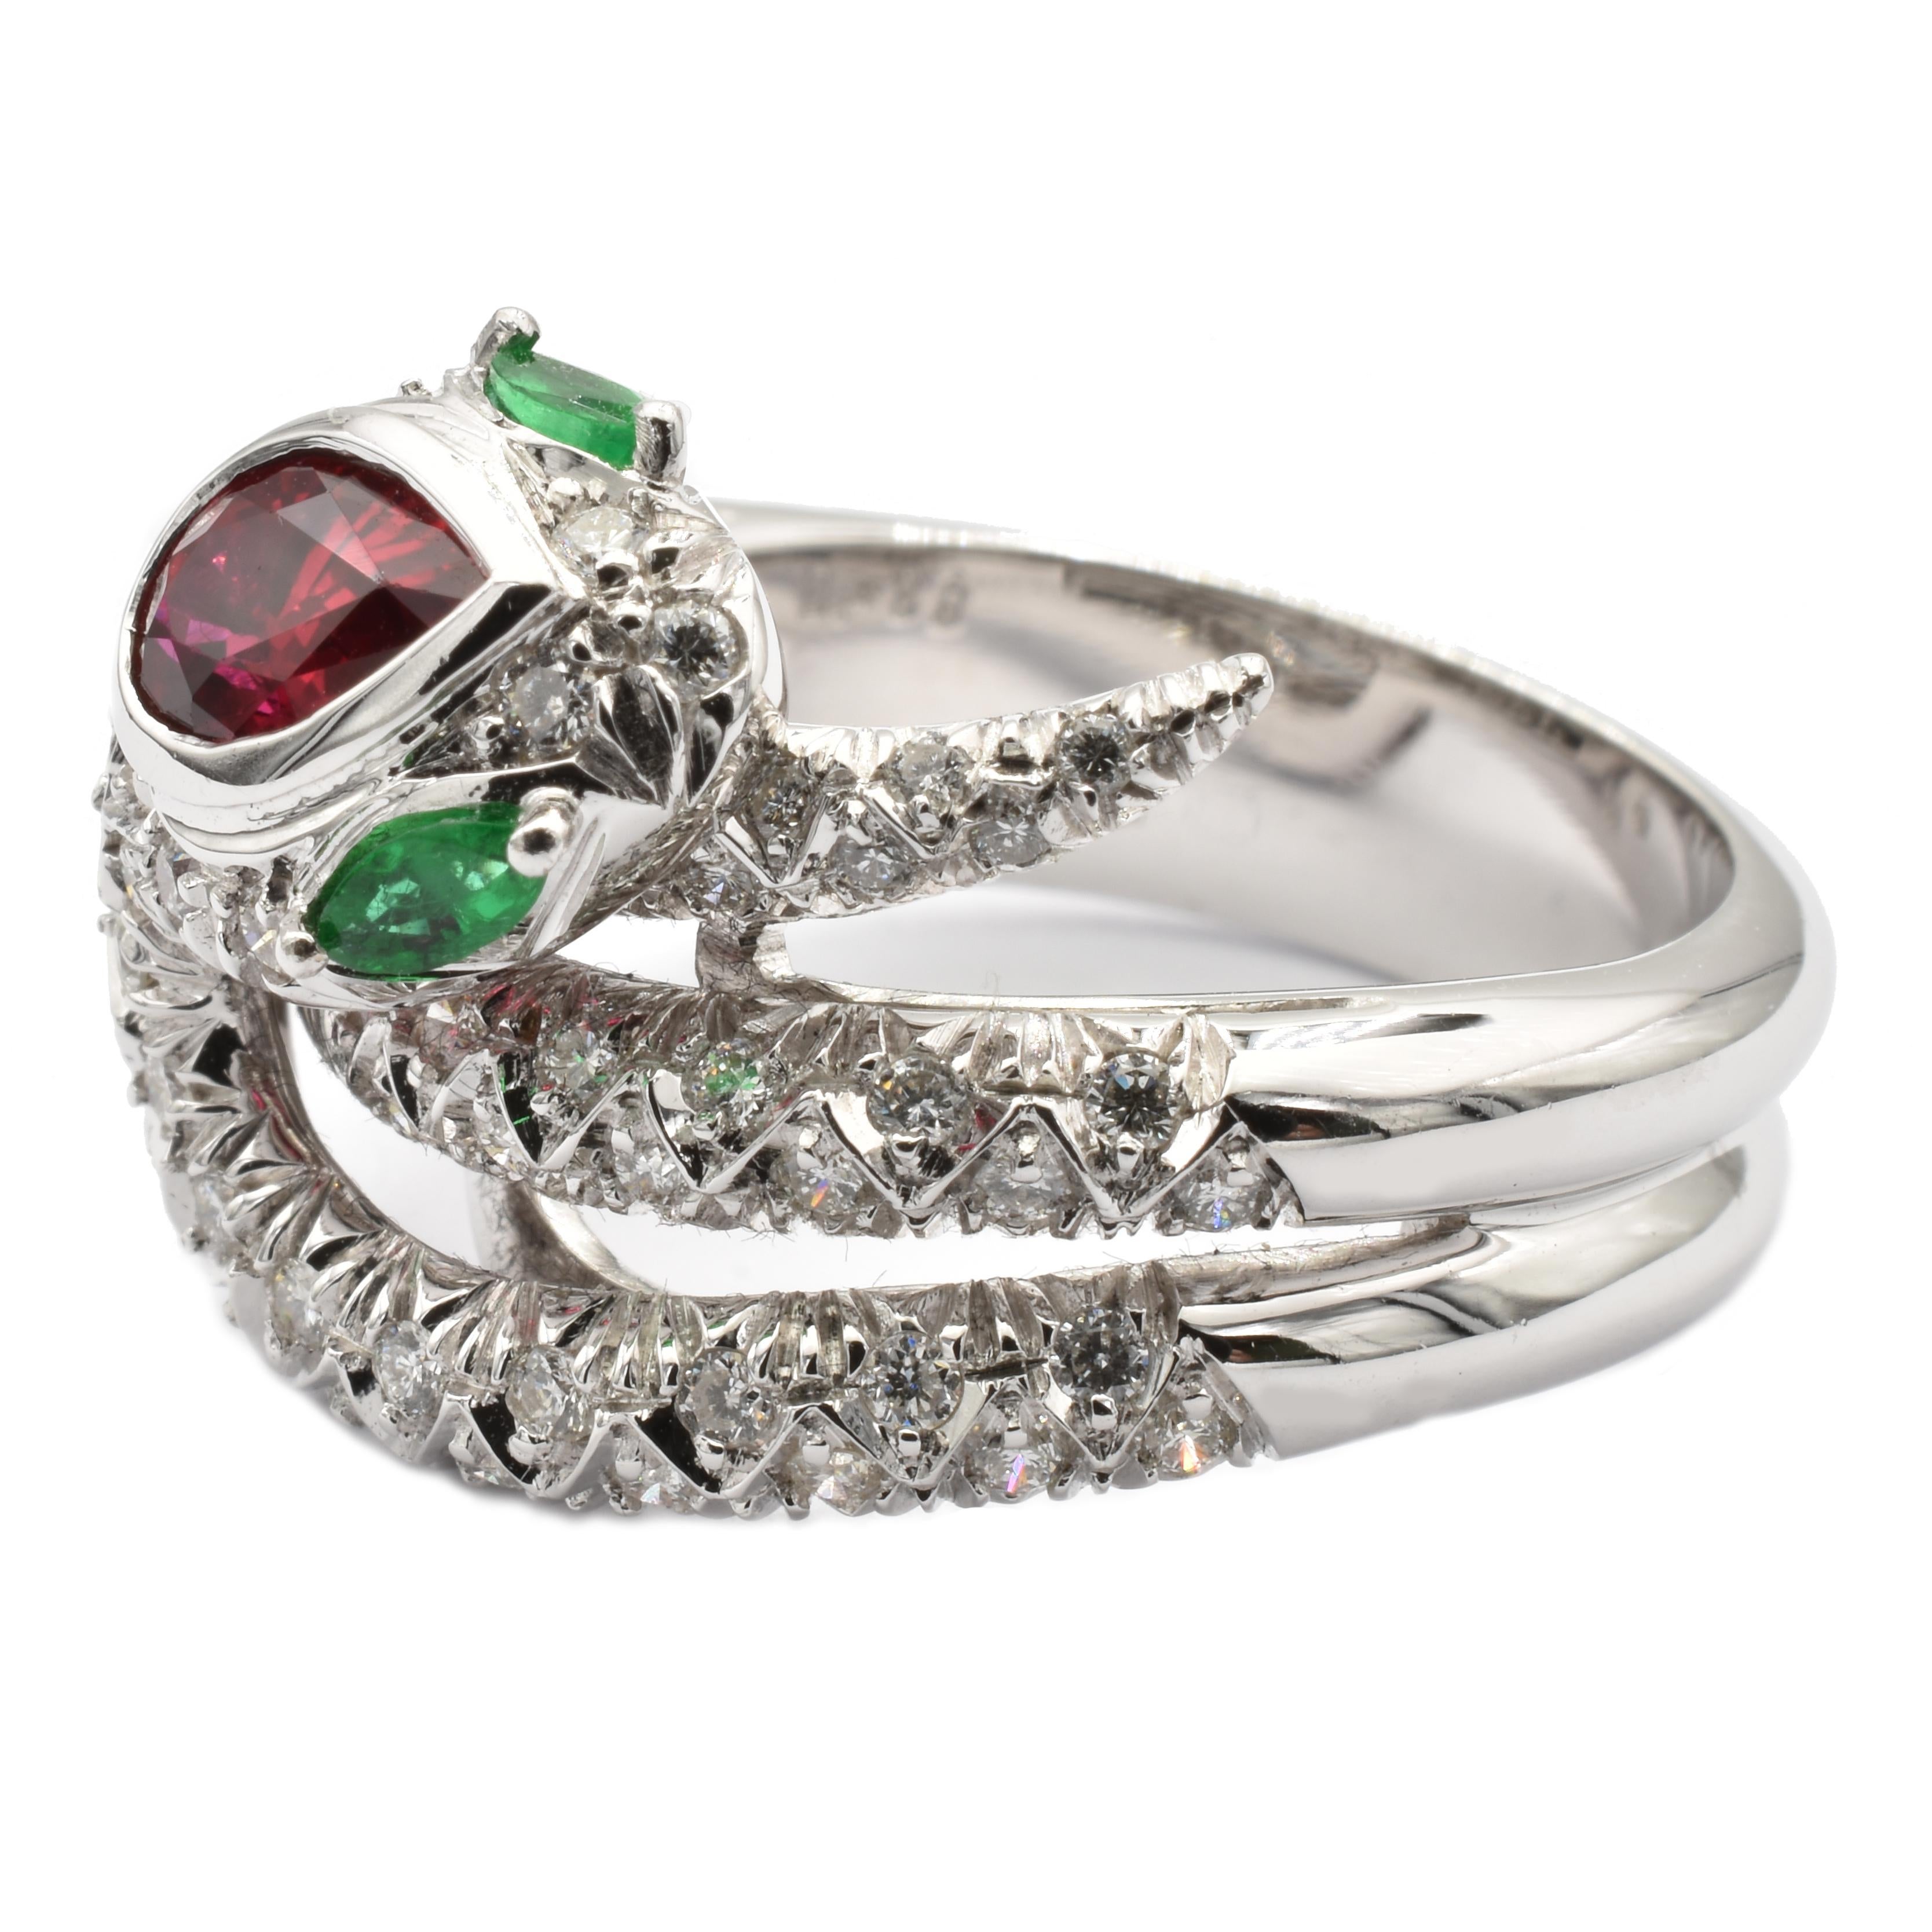 Gilberto Cassola 18Kt White Gold Snake Ring with a Pear Ruby, two Marquise Emeralds and Diamonds.
Handmade in our Atelier in Valenza Italy.
Intense Red Natural Ruby Pear sized mm 7.50 X 4.80. Weight ct 0,70
Two  Bright Green Natural Emerald